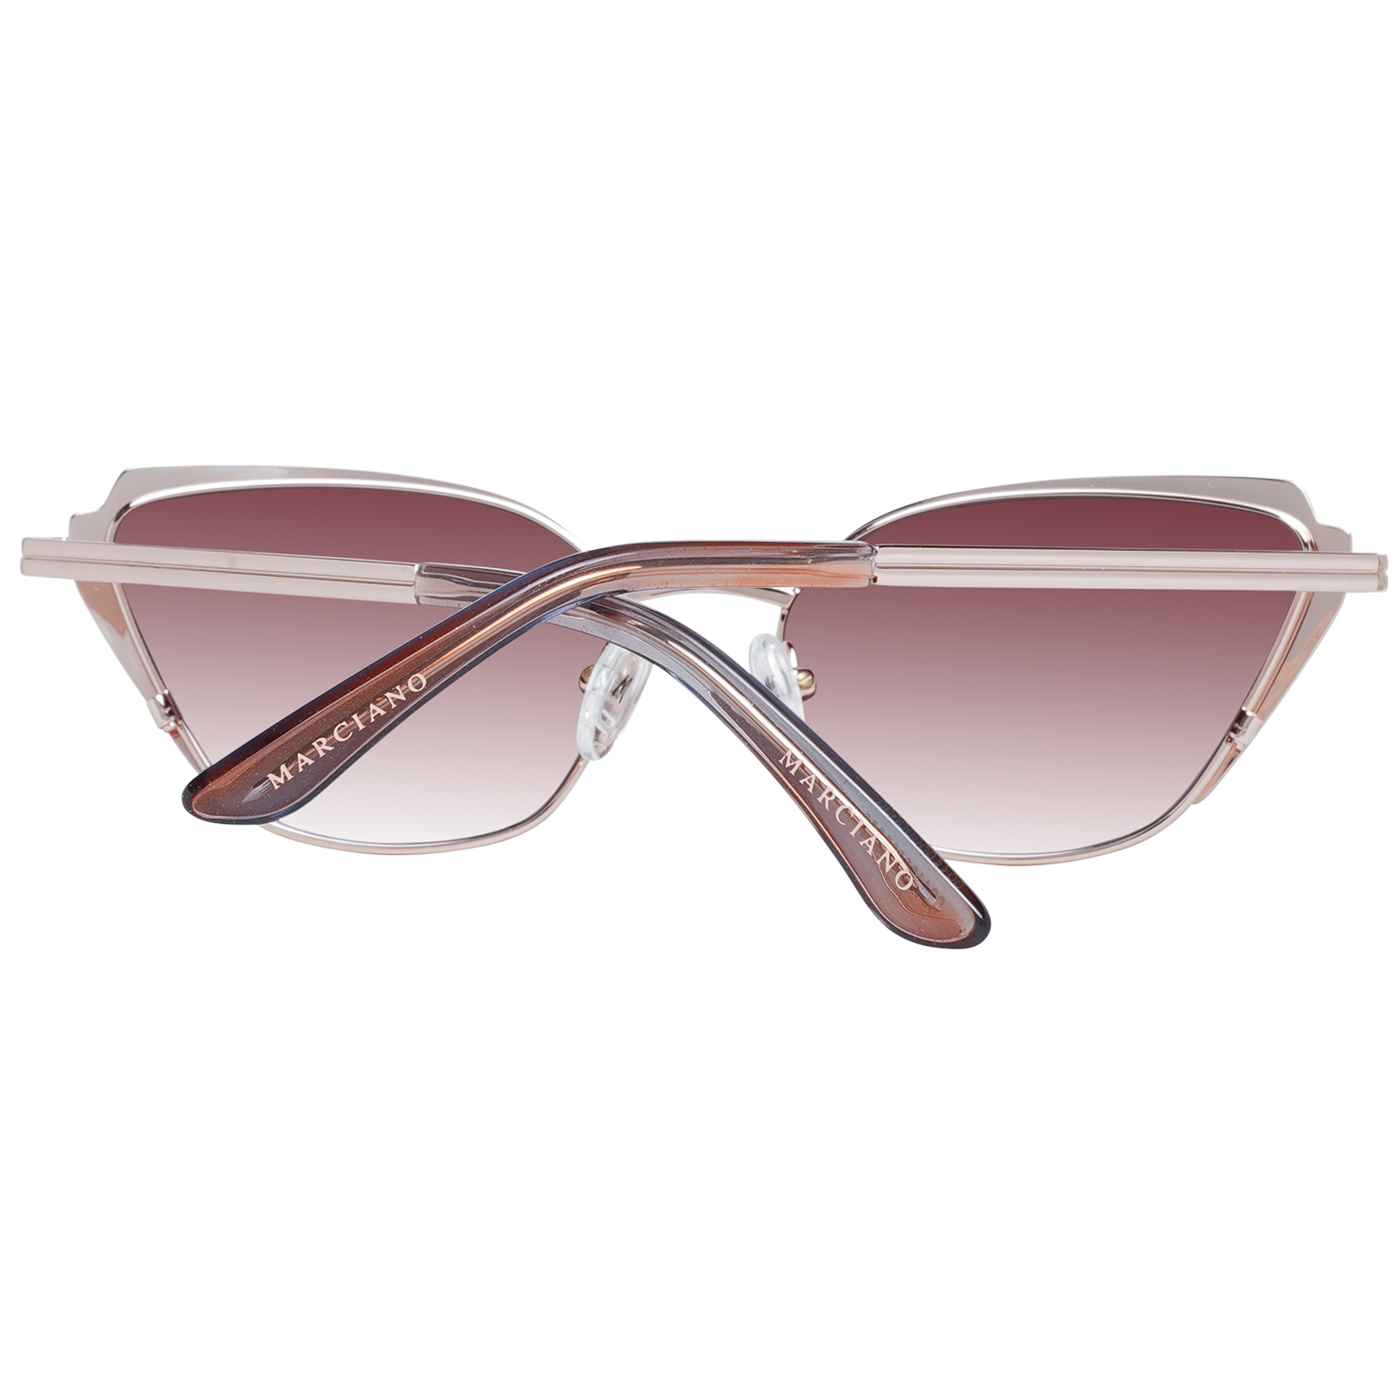 Marciano by Guess Rose Gold Women Sunglasses